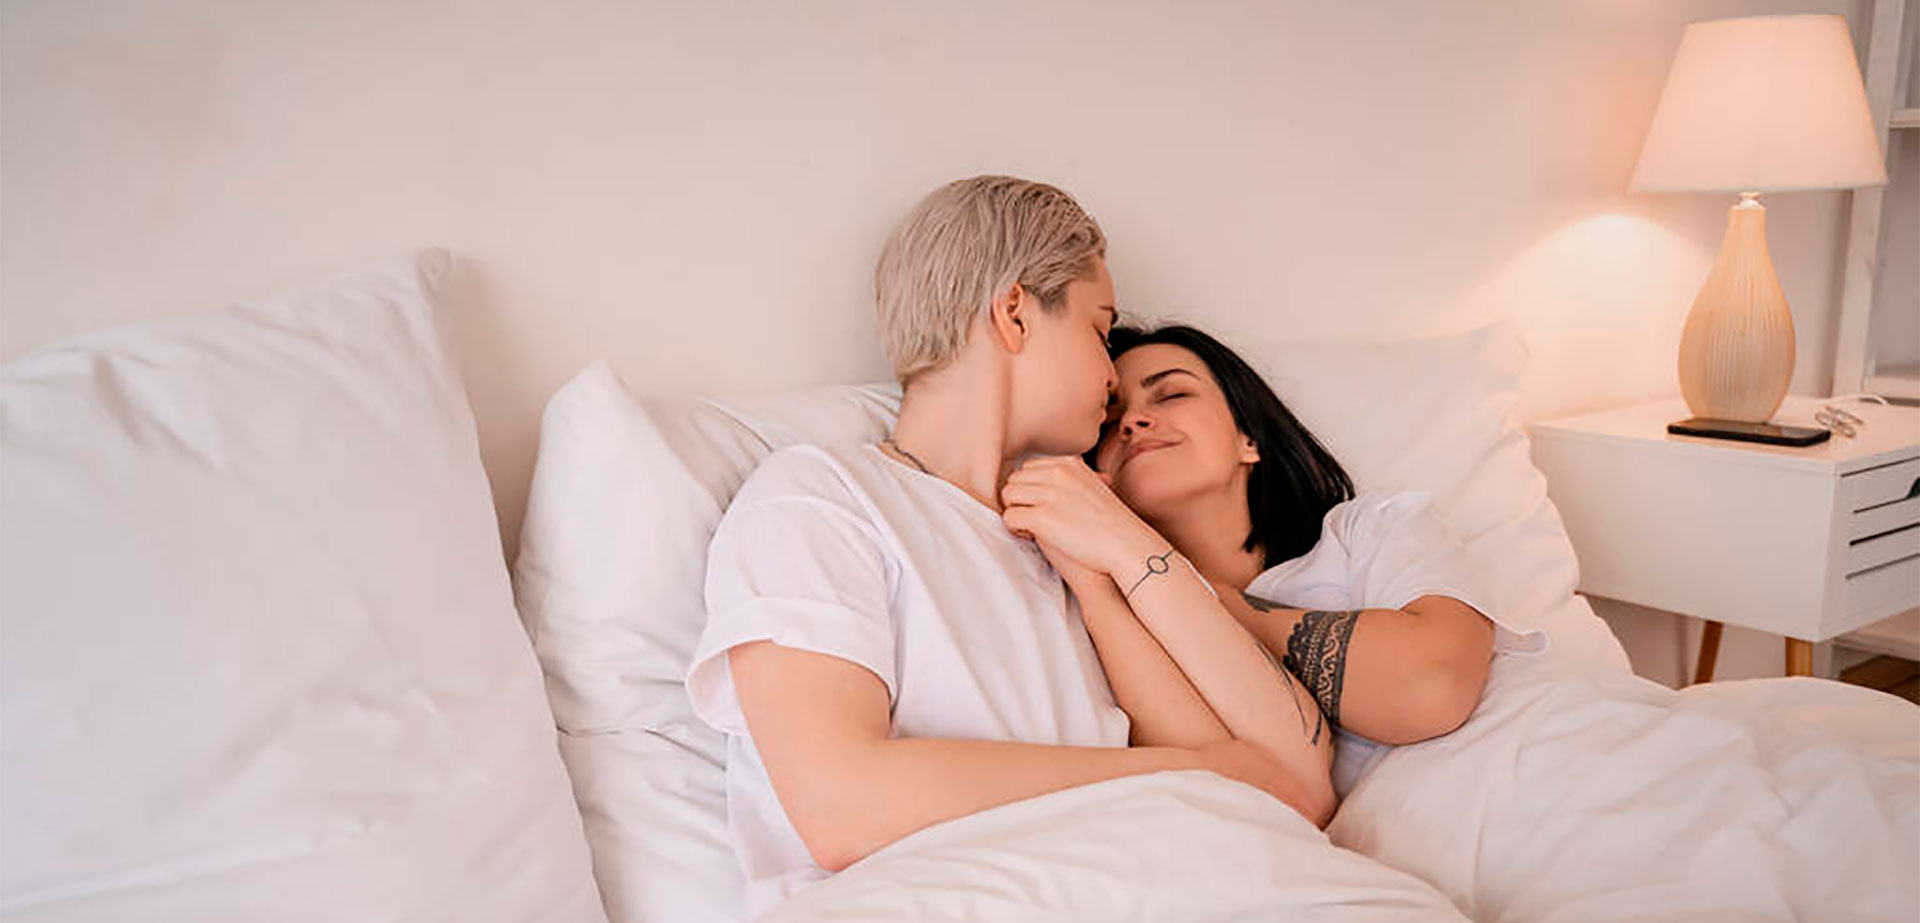 Lesbian Couple In The Bedroom.